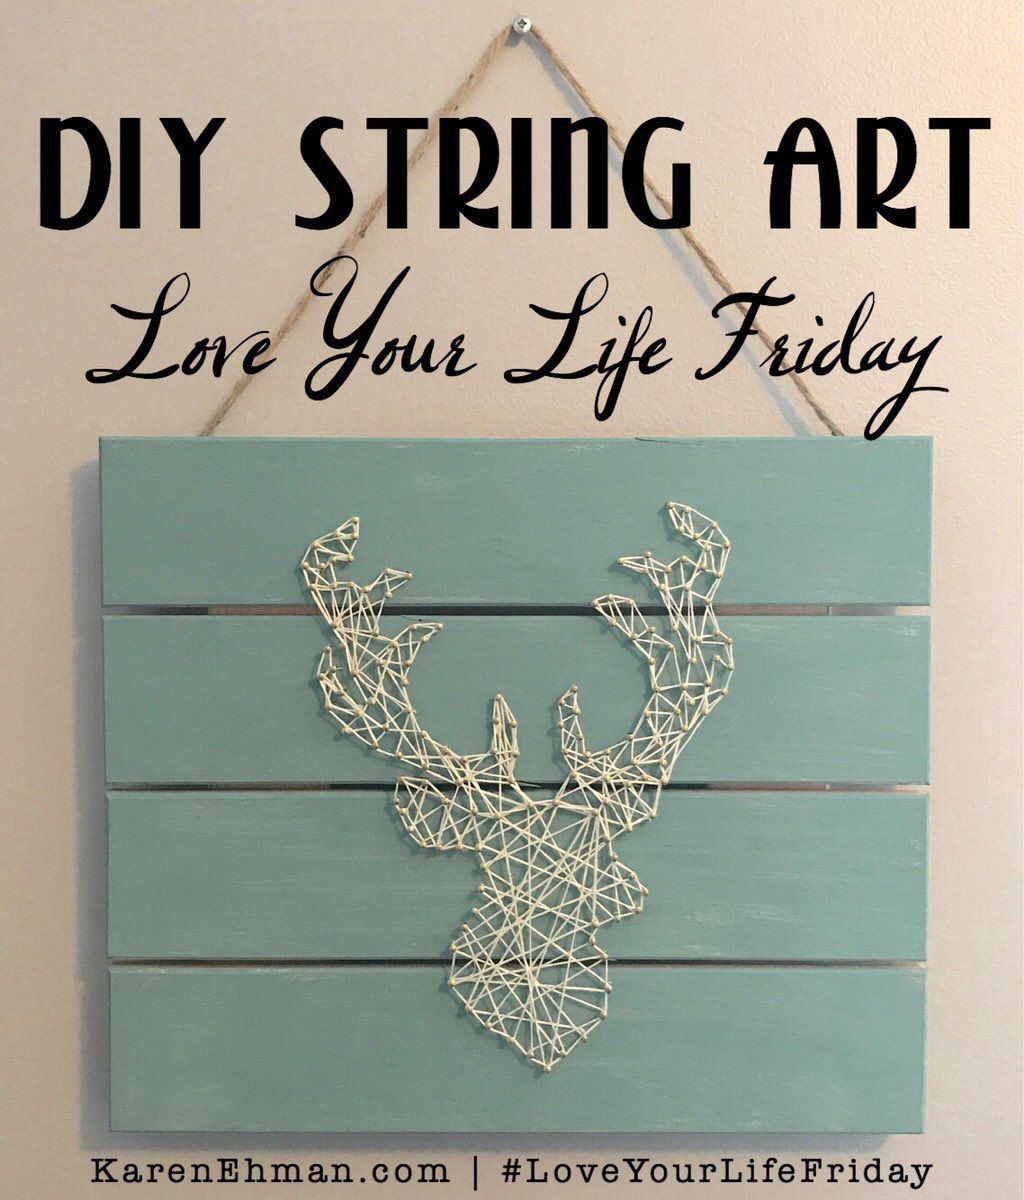 DIY String Art by April Wilson for Love Your Life Friday at karenehman.com. Click here for tutorial with pictures.